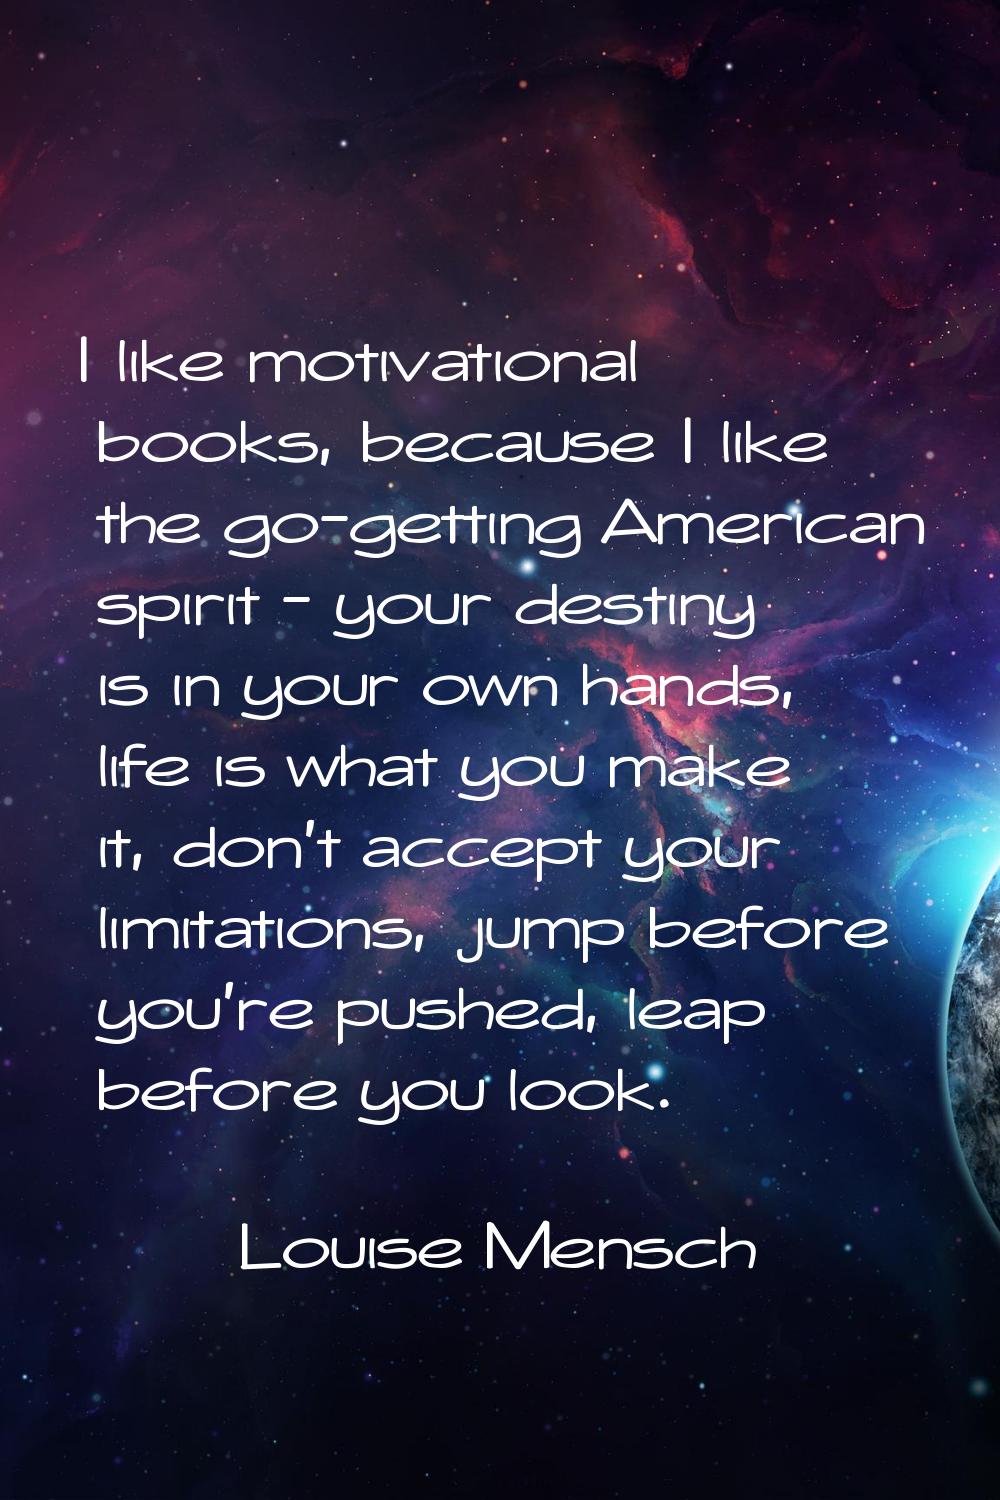 I like motivational books, because I like the go-getting American spirit - your destiny is in your 